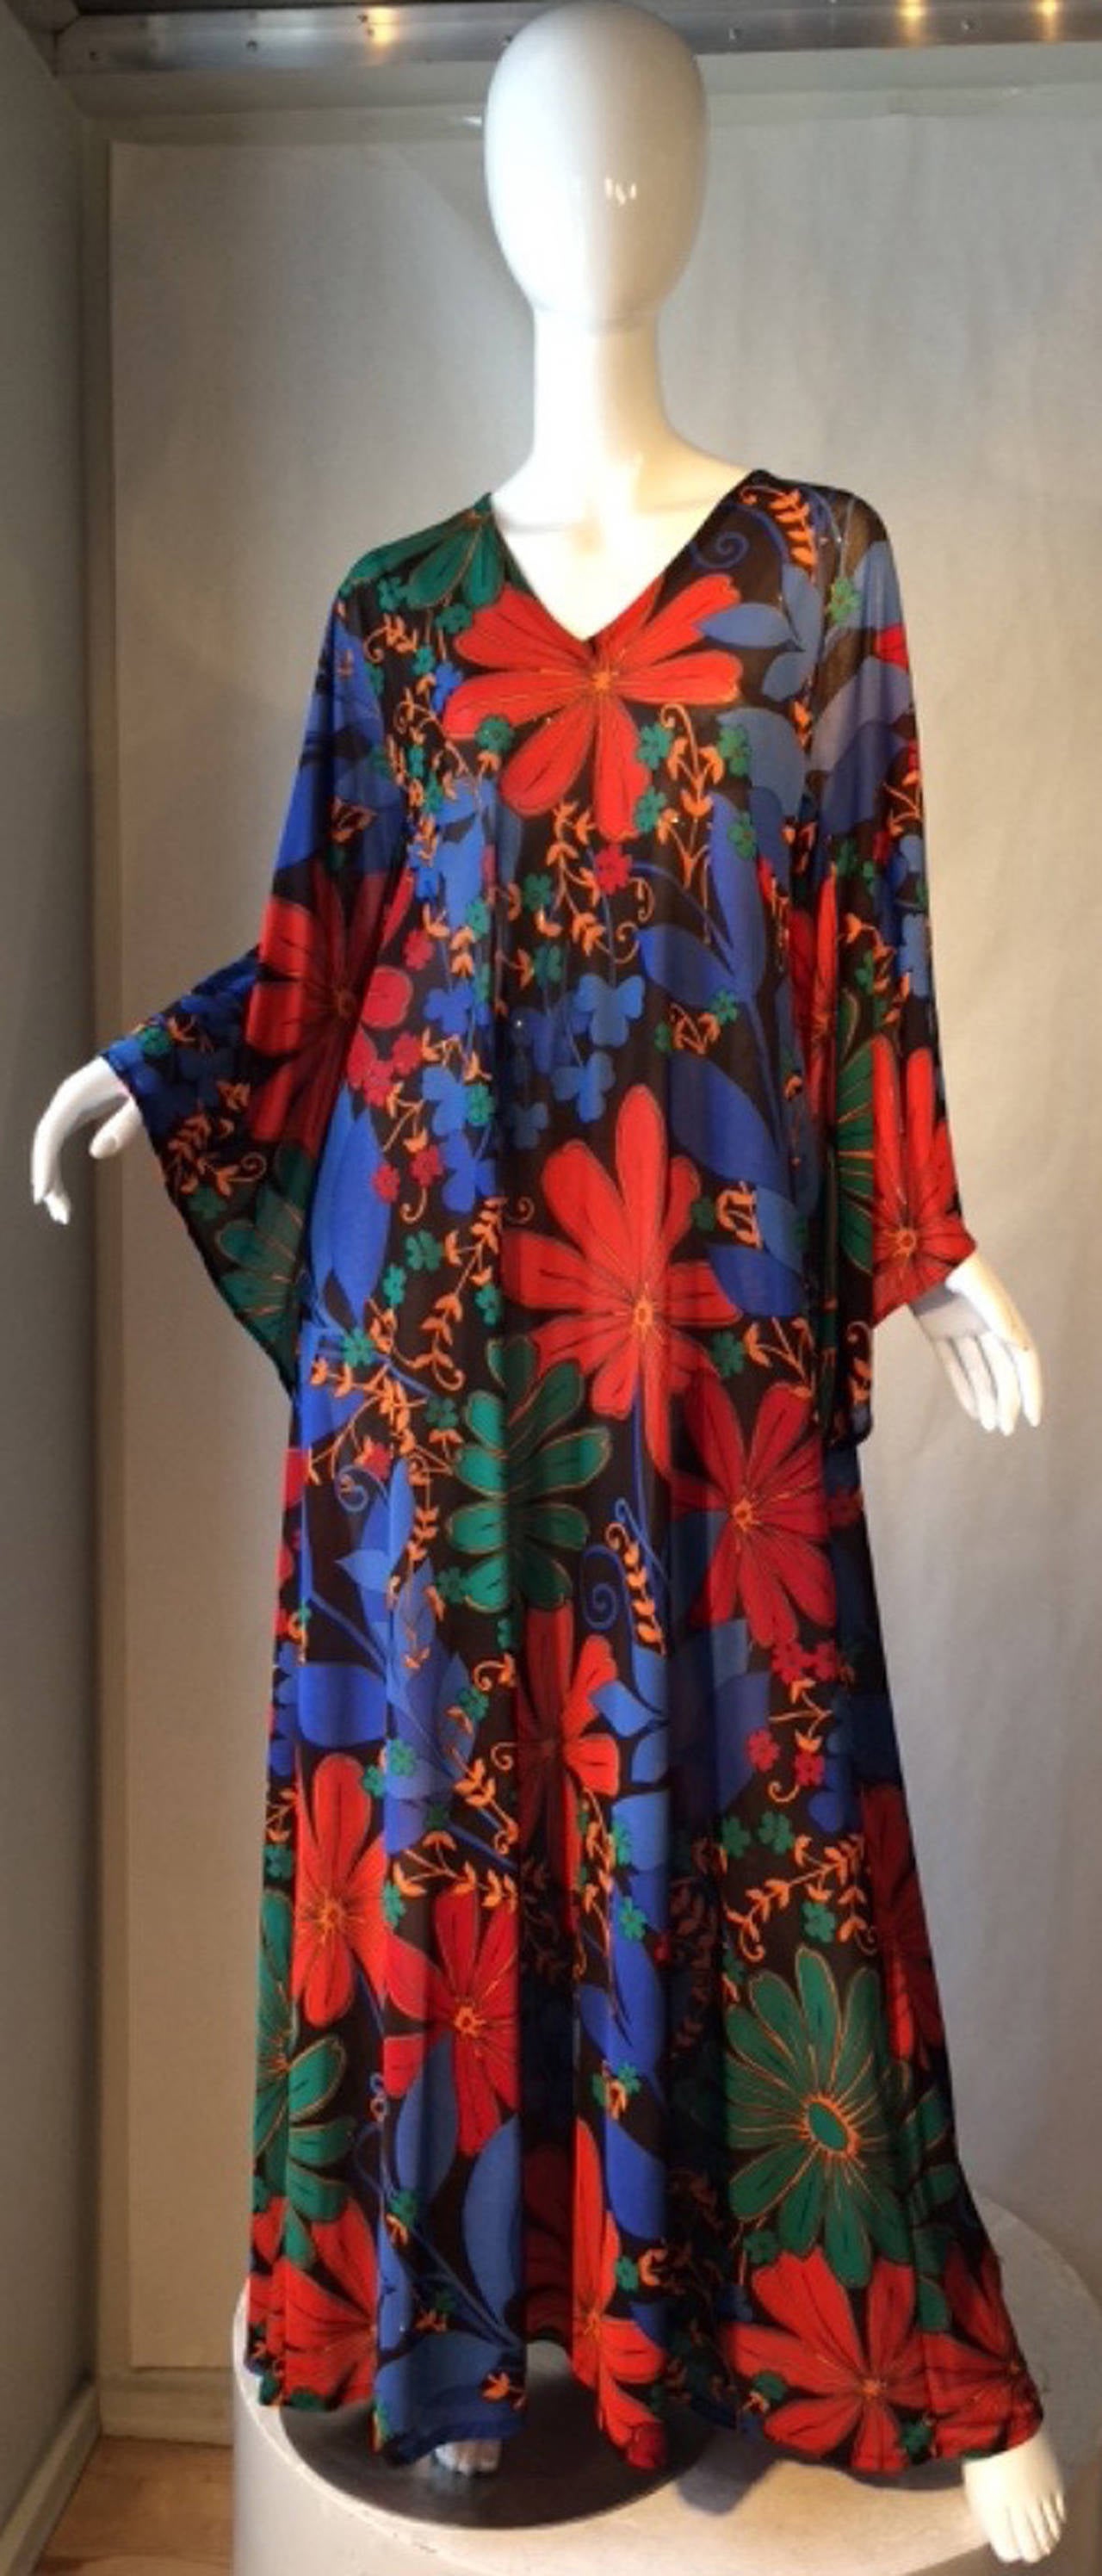 A fine vintage Gottex caftan. Vibrantly printed jersey item slips over head with wide pointed sleeves. Matching sash belt/tie intact and included. Pristine.